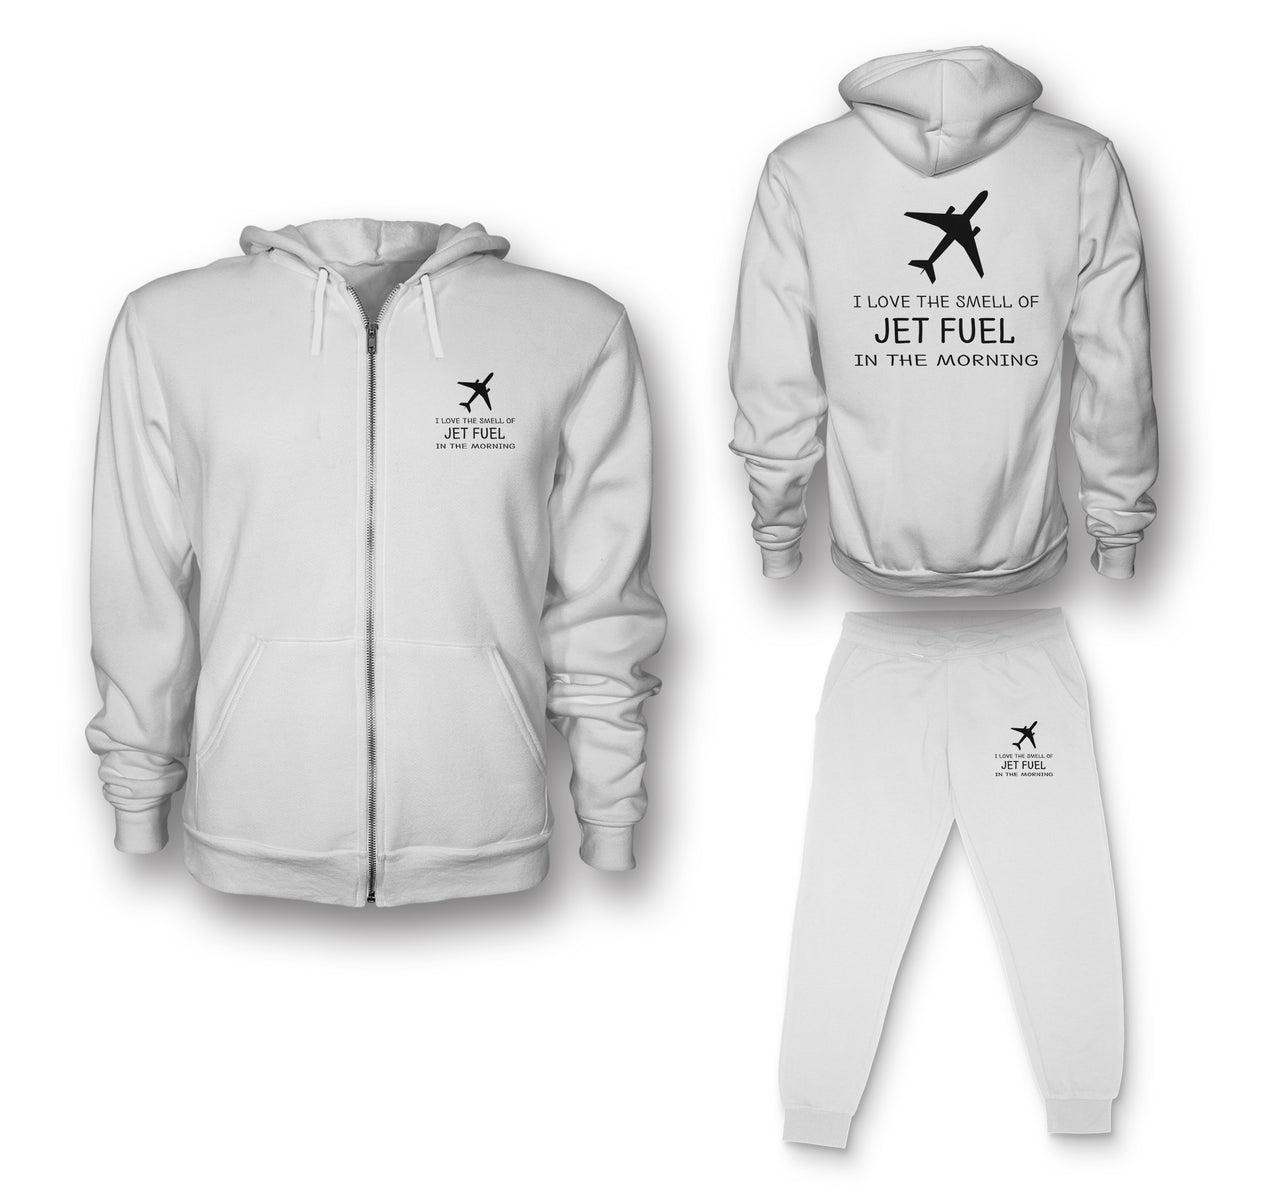 I Love The Smell Of Jet Fuel In The Morning Designed Zipped Hoodies & Sweatpants Set